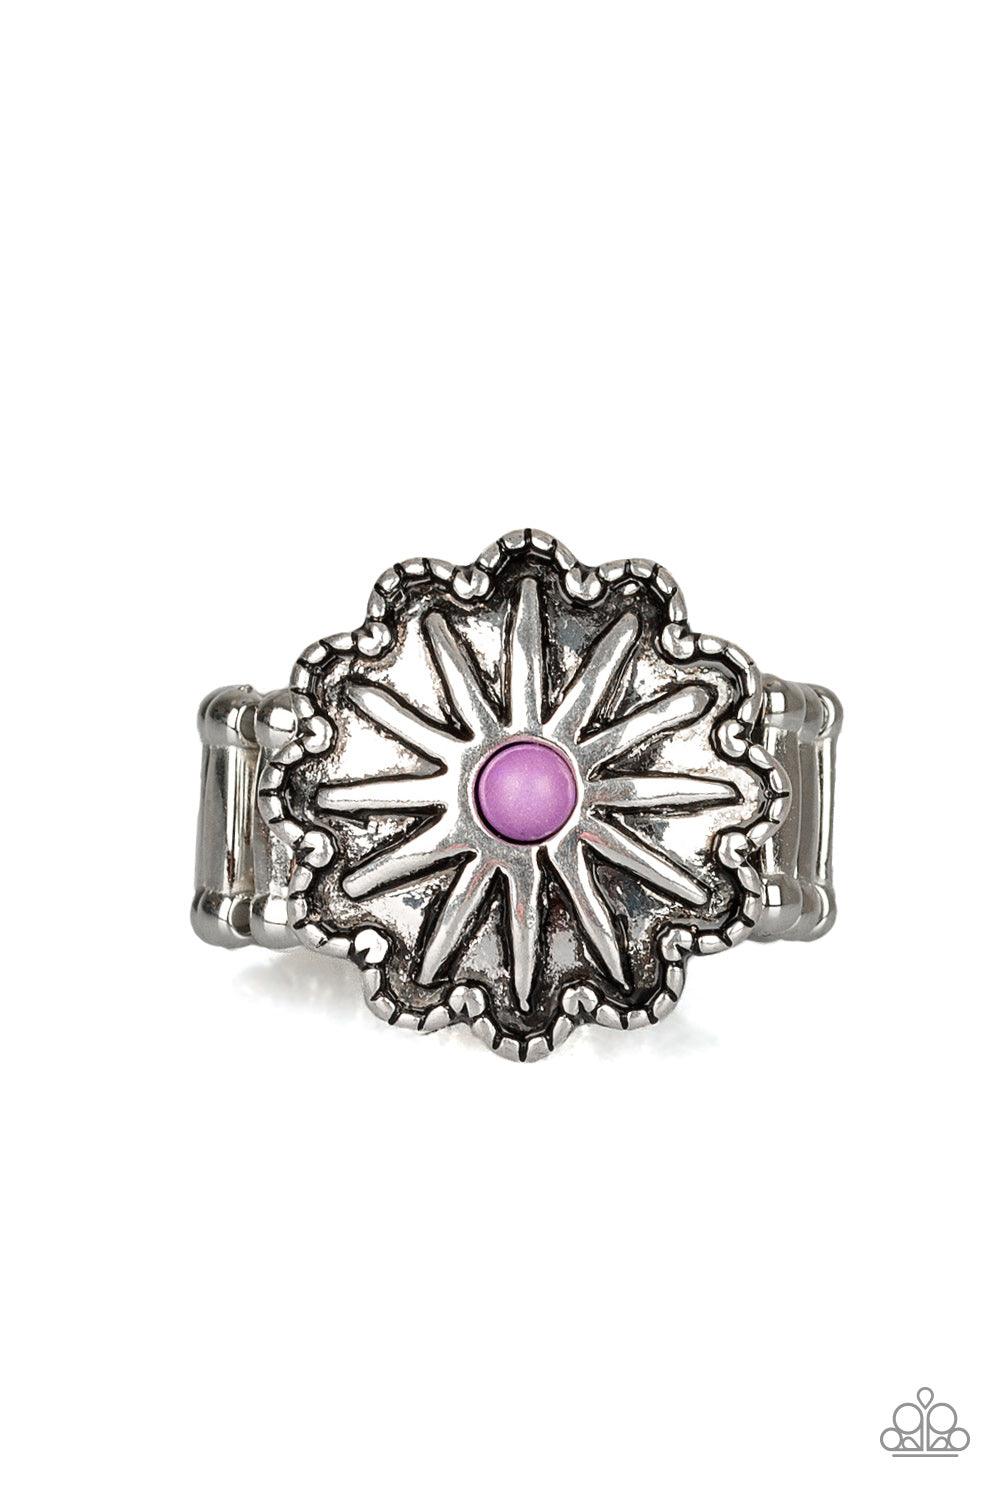 Paparazzi Accessories Stone Sensei - Purple A dainty purple stone bead is pressed into the center of an antiqued silver frame radiating with floral detail for a seasonal flair. Features a stretchy band for a flexible fit. Sold as one individual ring. Jewe